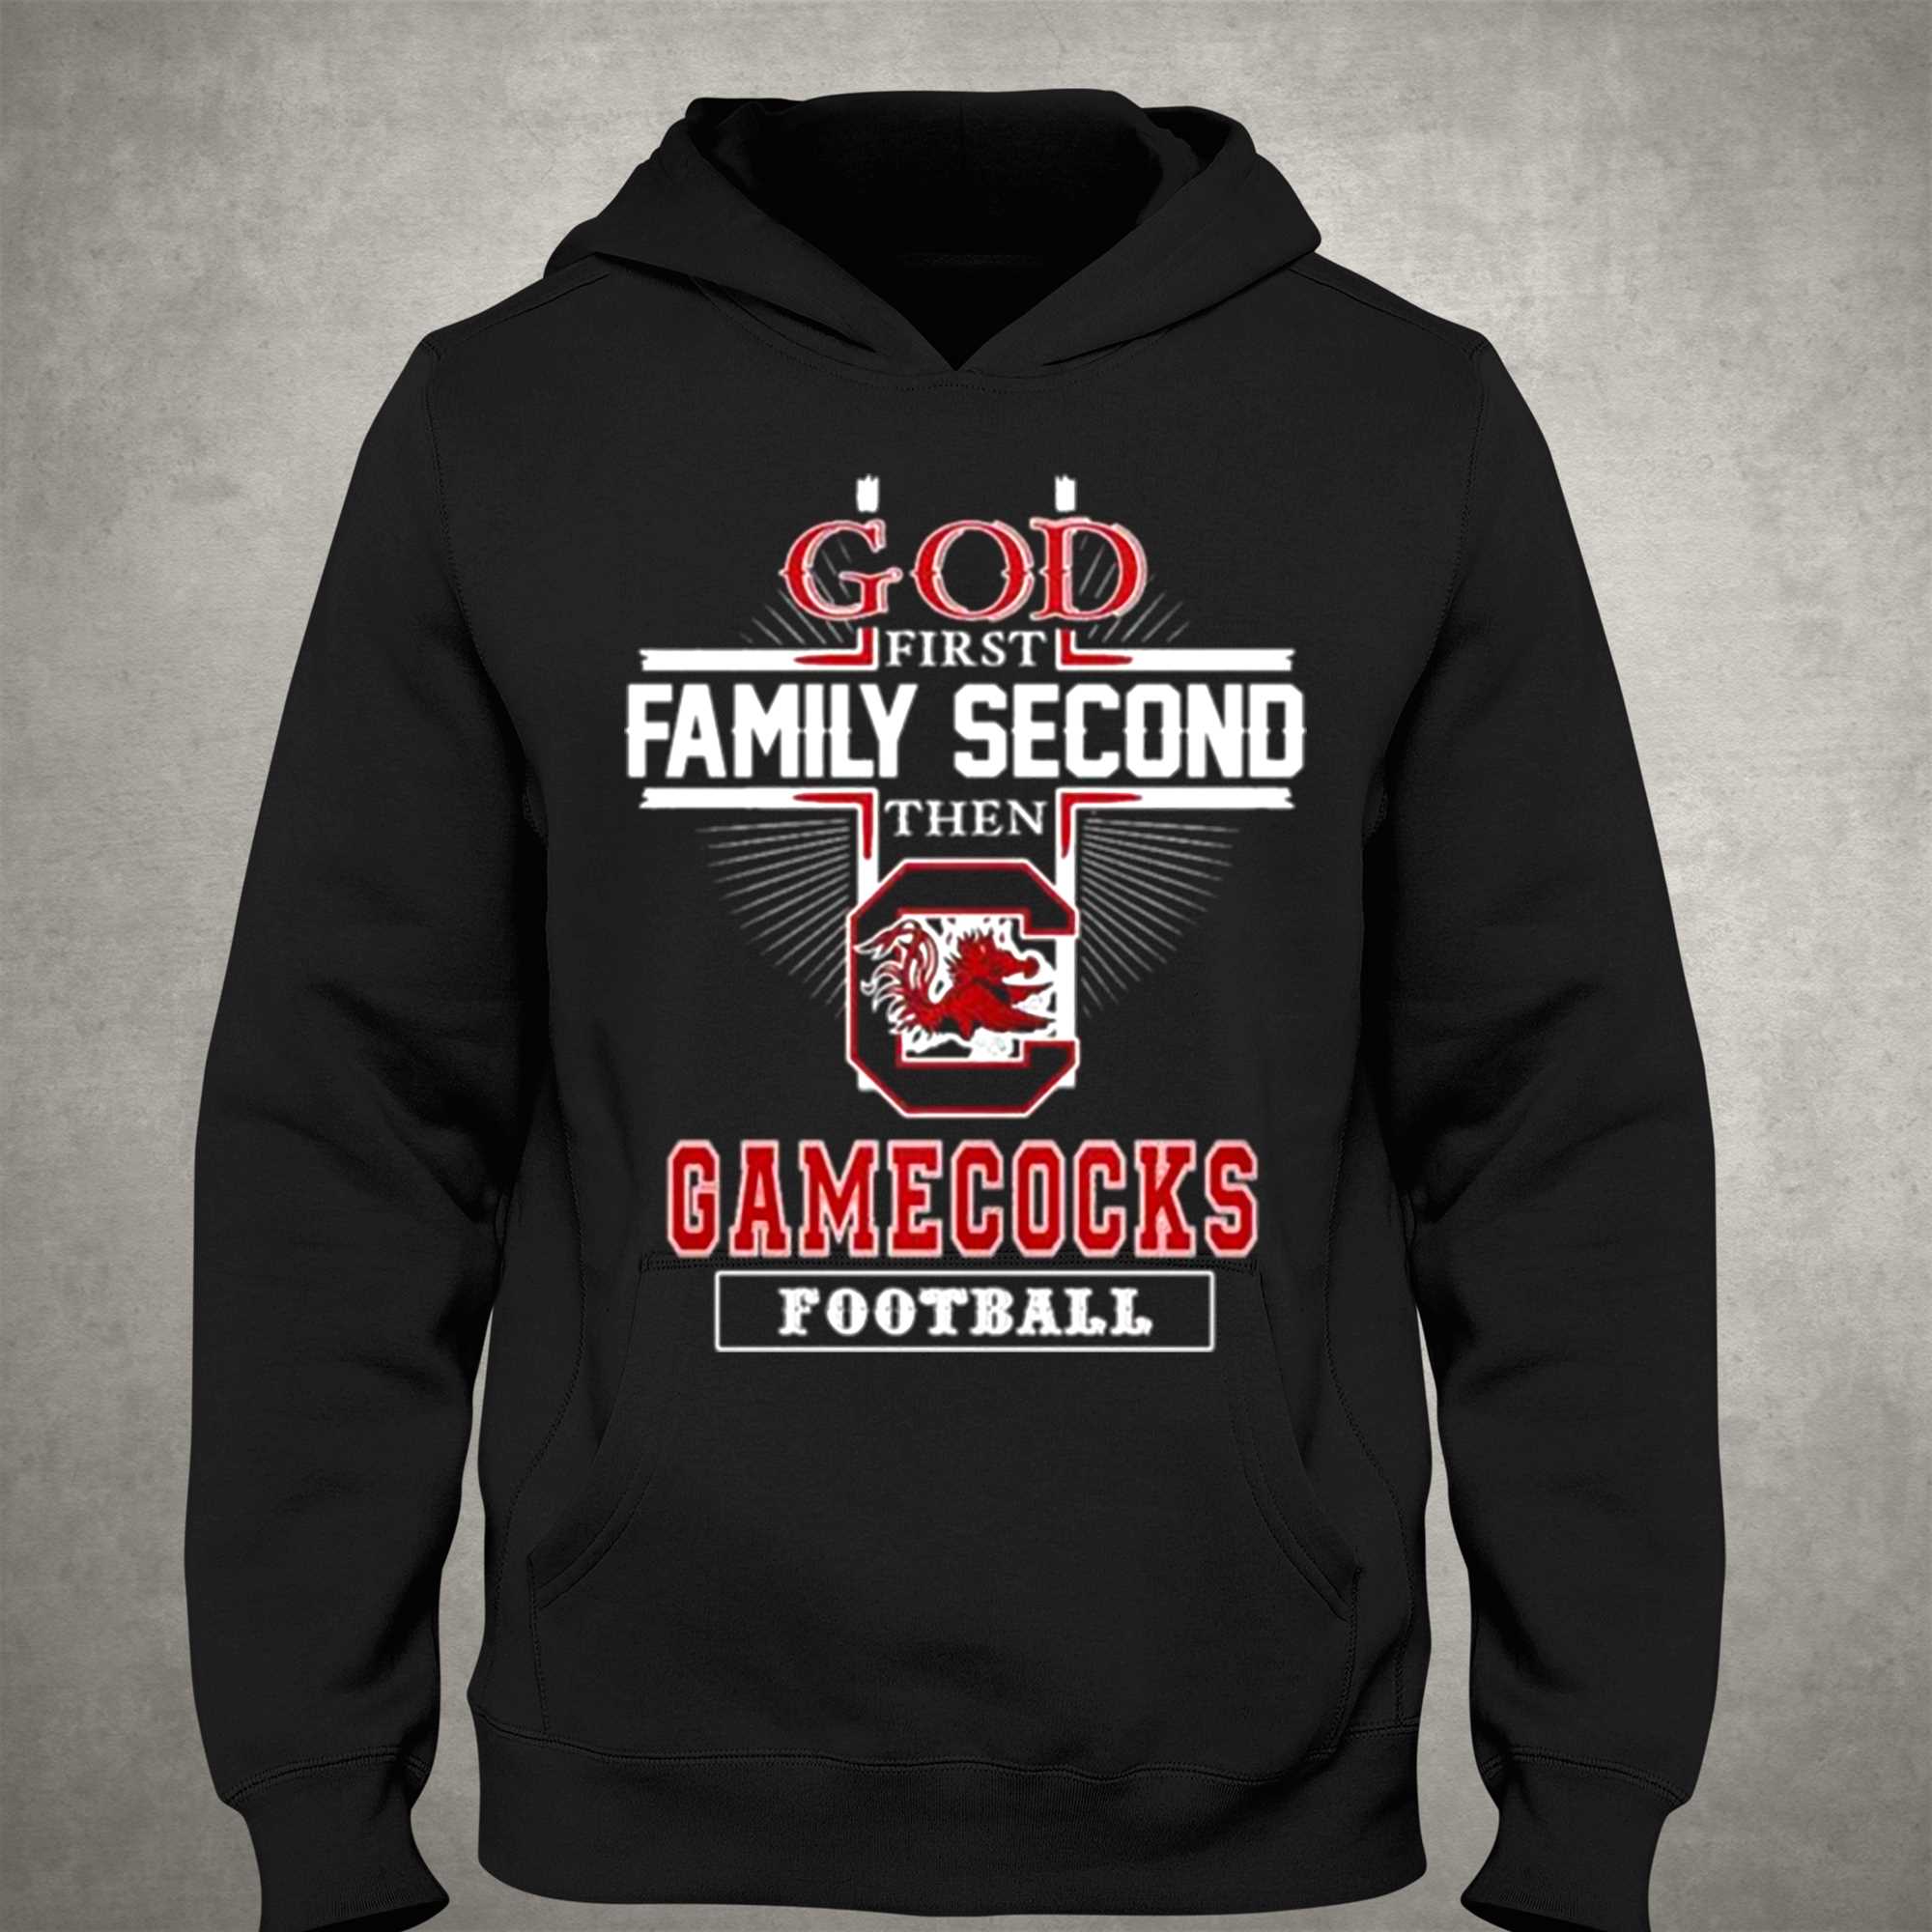 God Family Second First Then Gamecocks Basketball T-shirt 